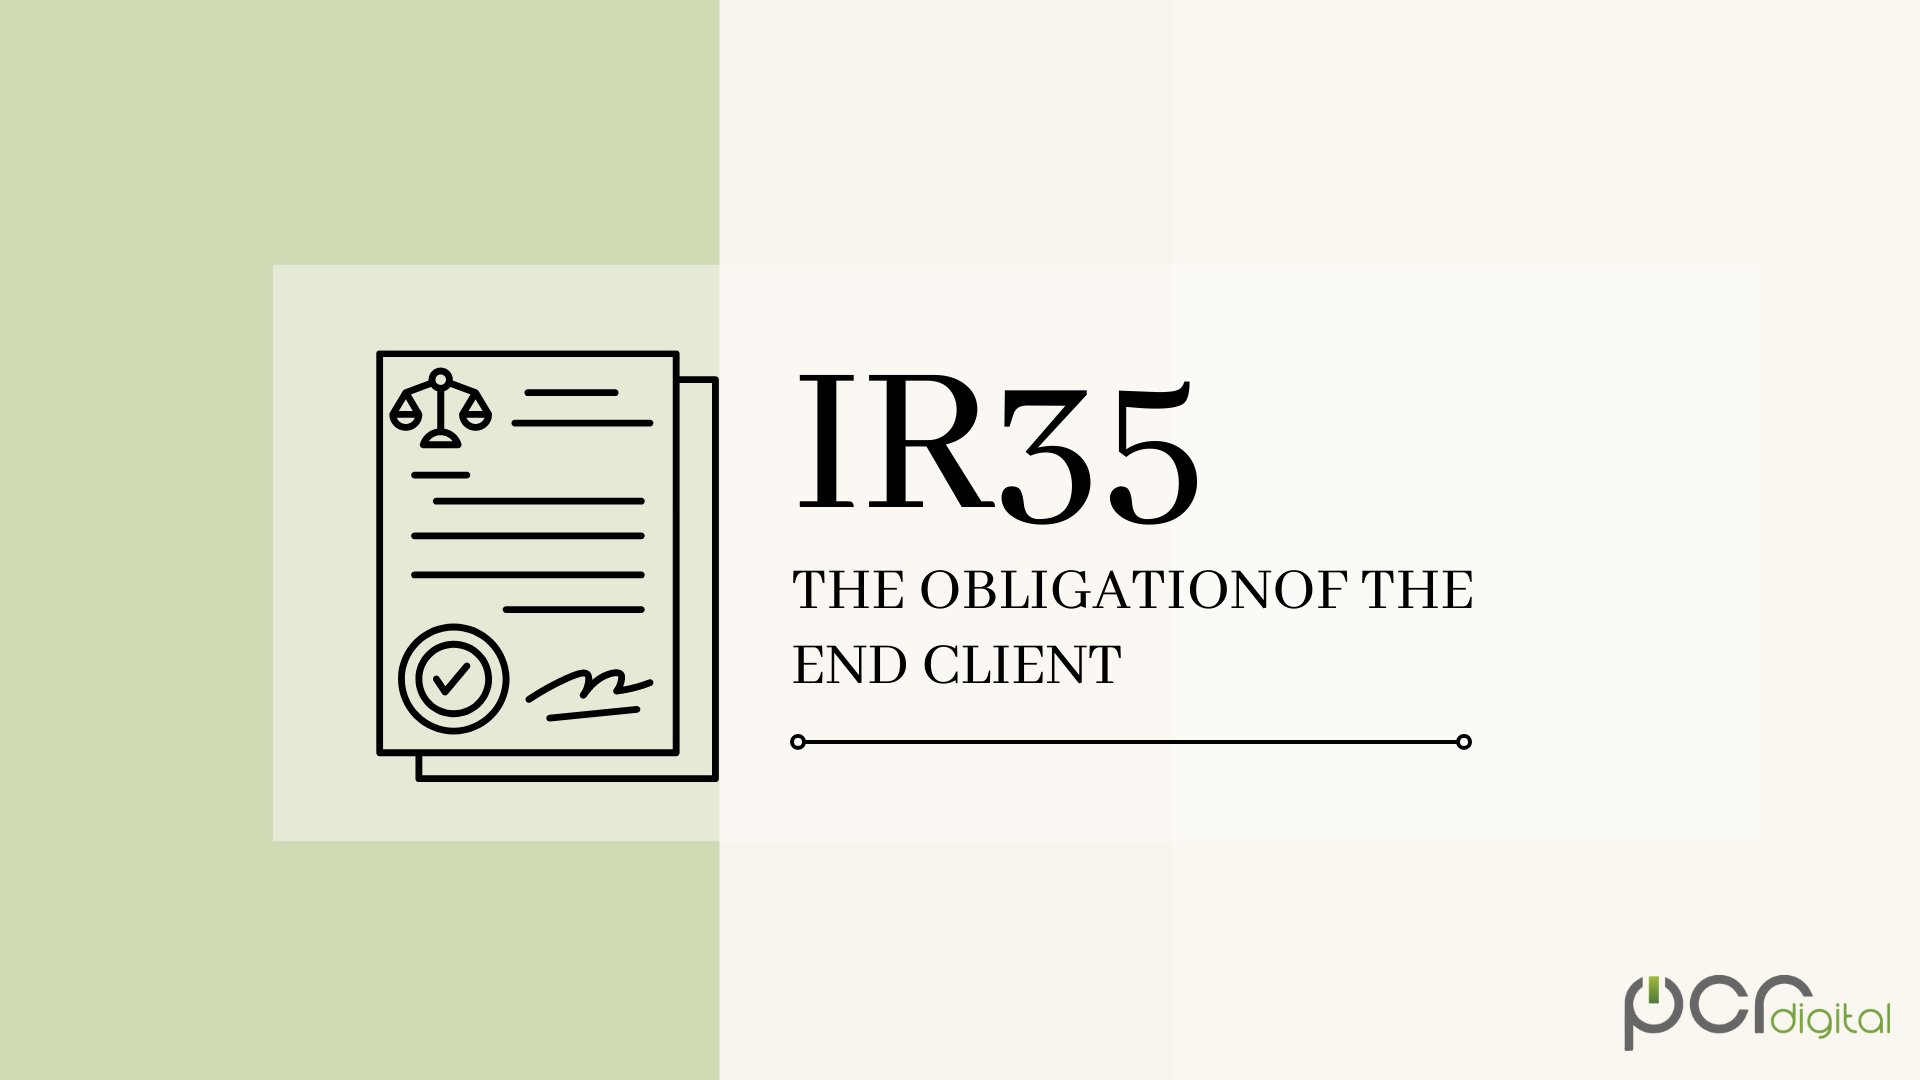 What do we know about IR35 so far? The obligation of the end client